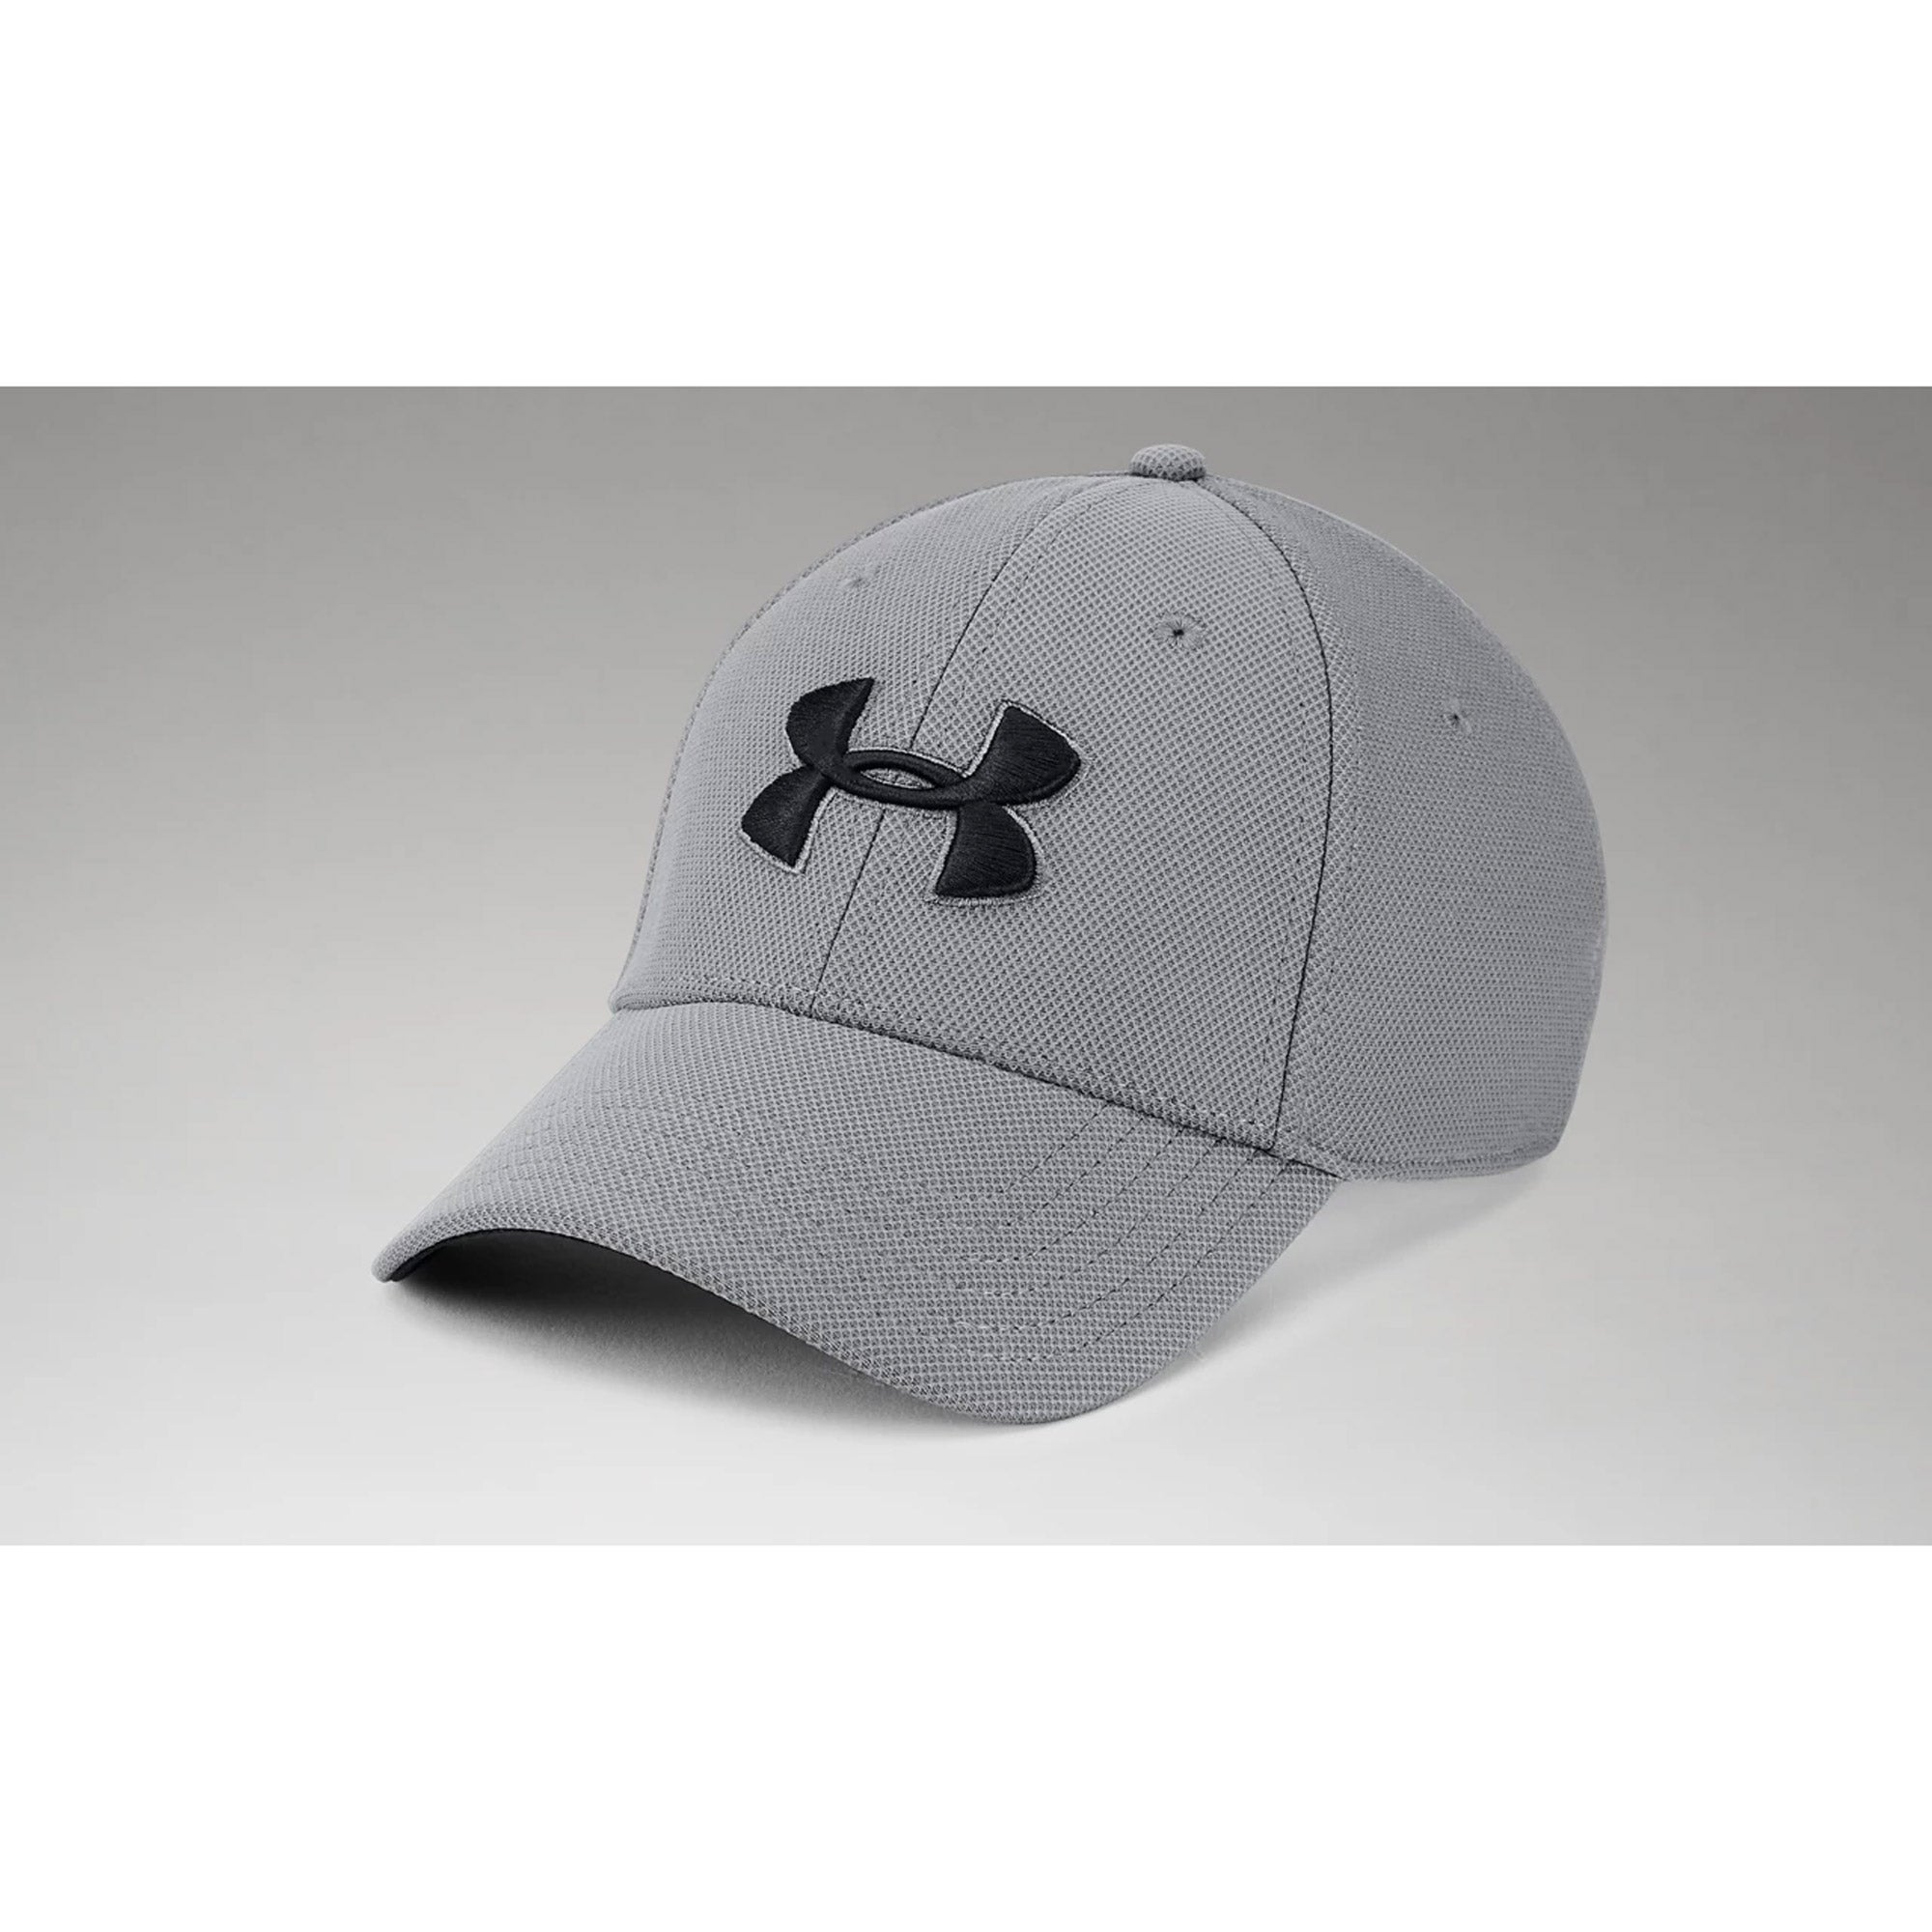 UA Blitzing 3.0 Ball Cap in Graphite with Black Logo by Under Armour  1305036-040